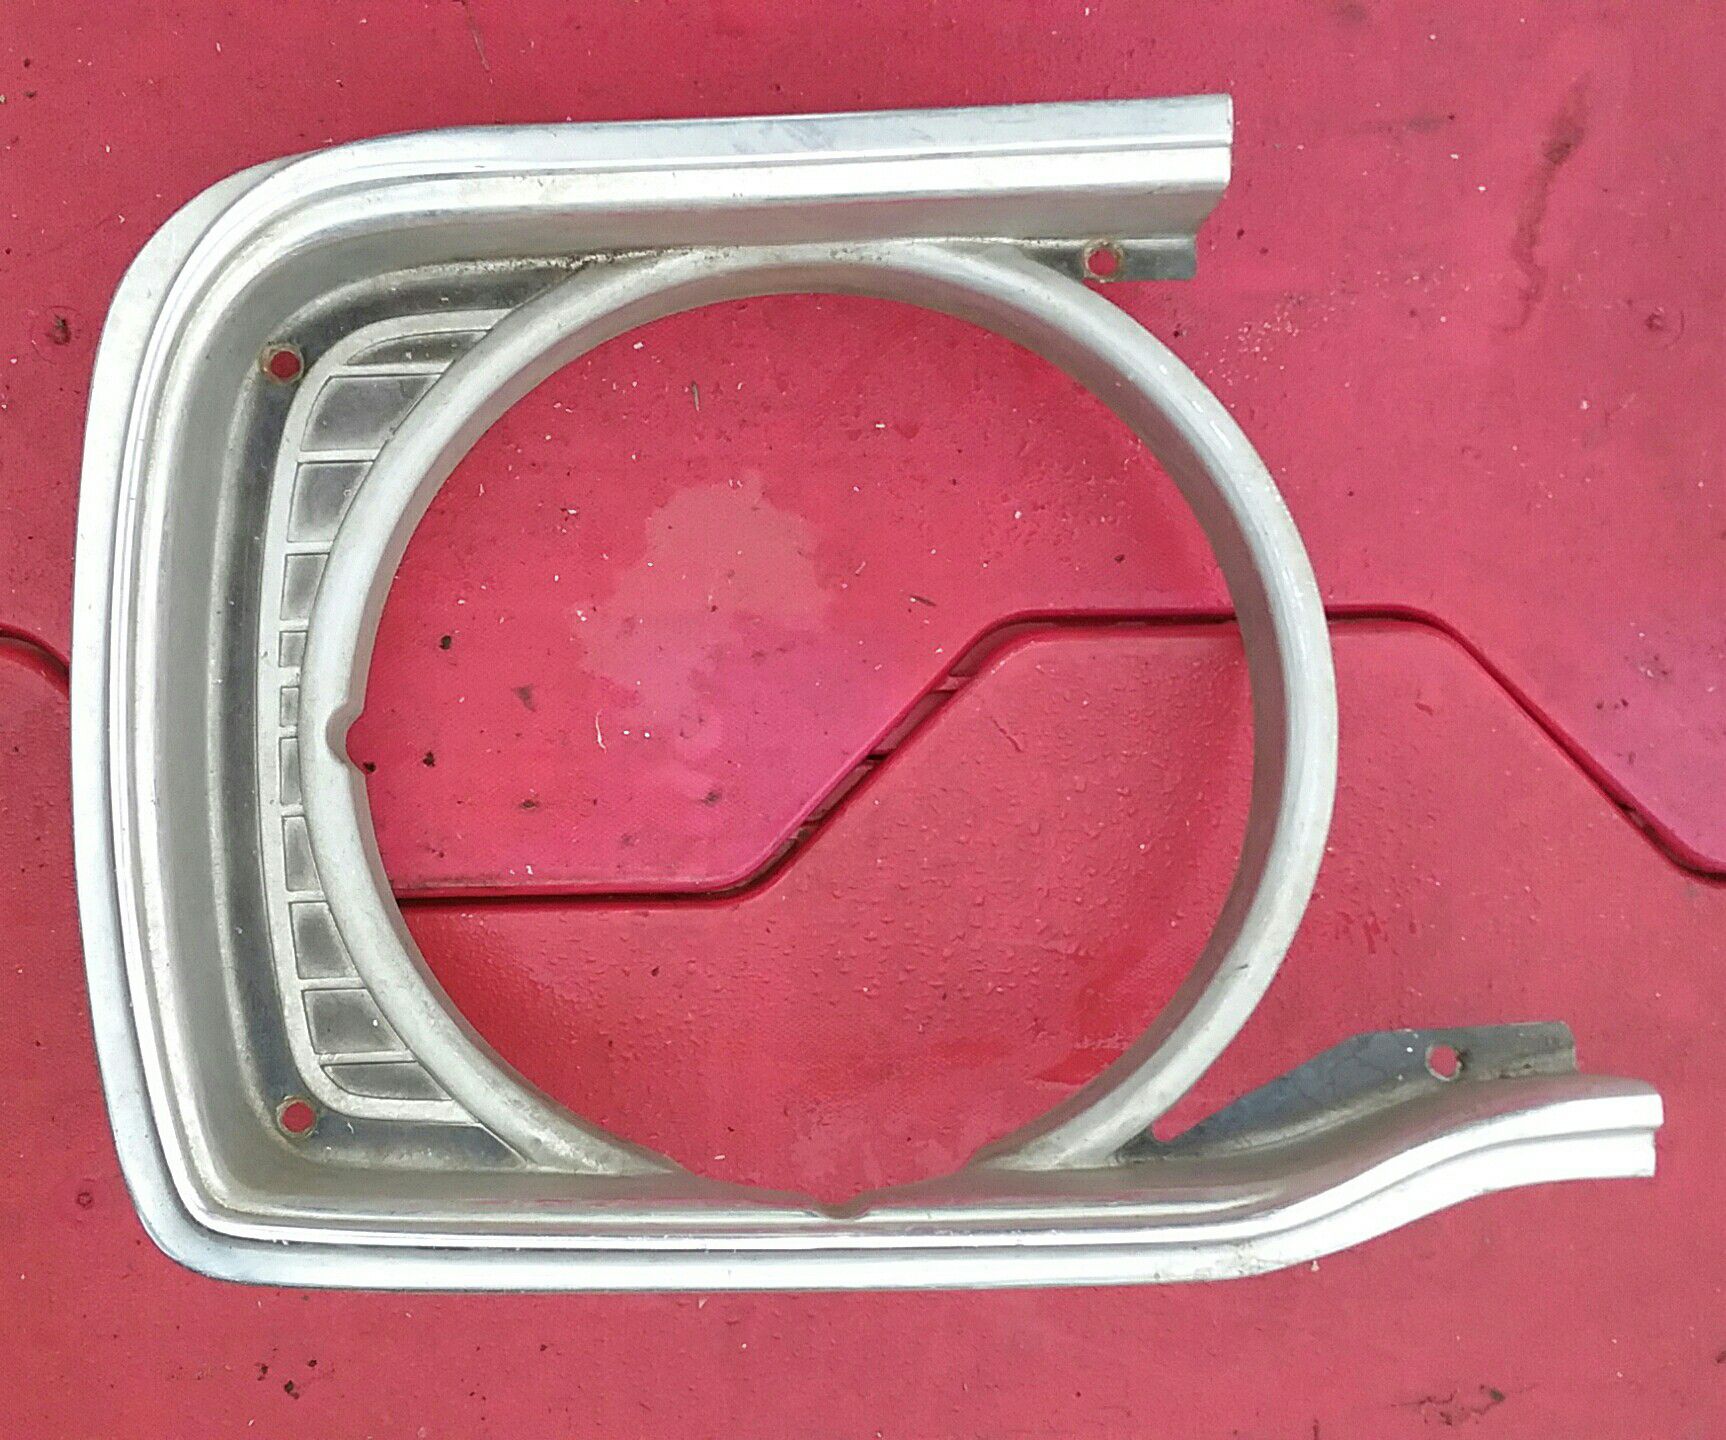 74 DODGE DART HEADLIGHT BEZELS AND GRILL USED